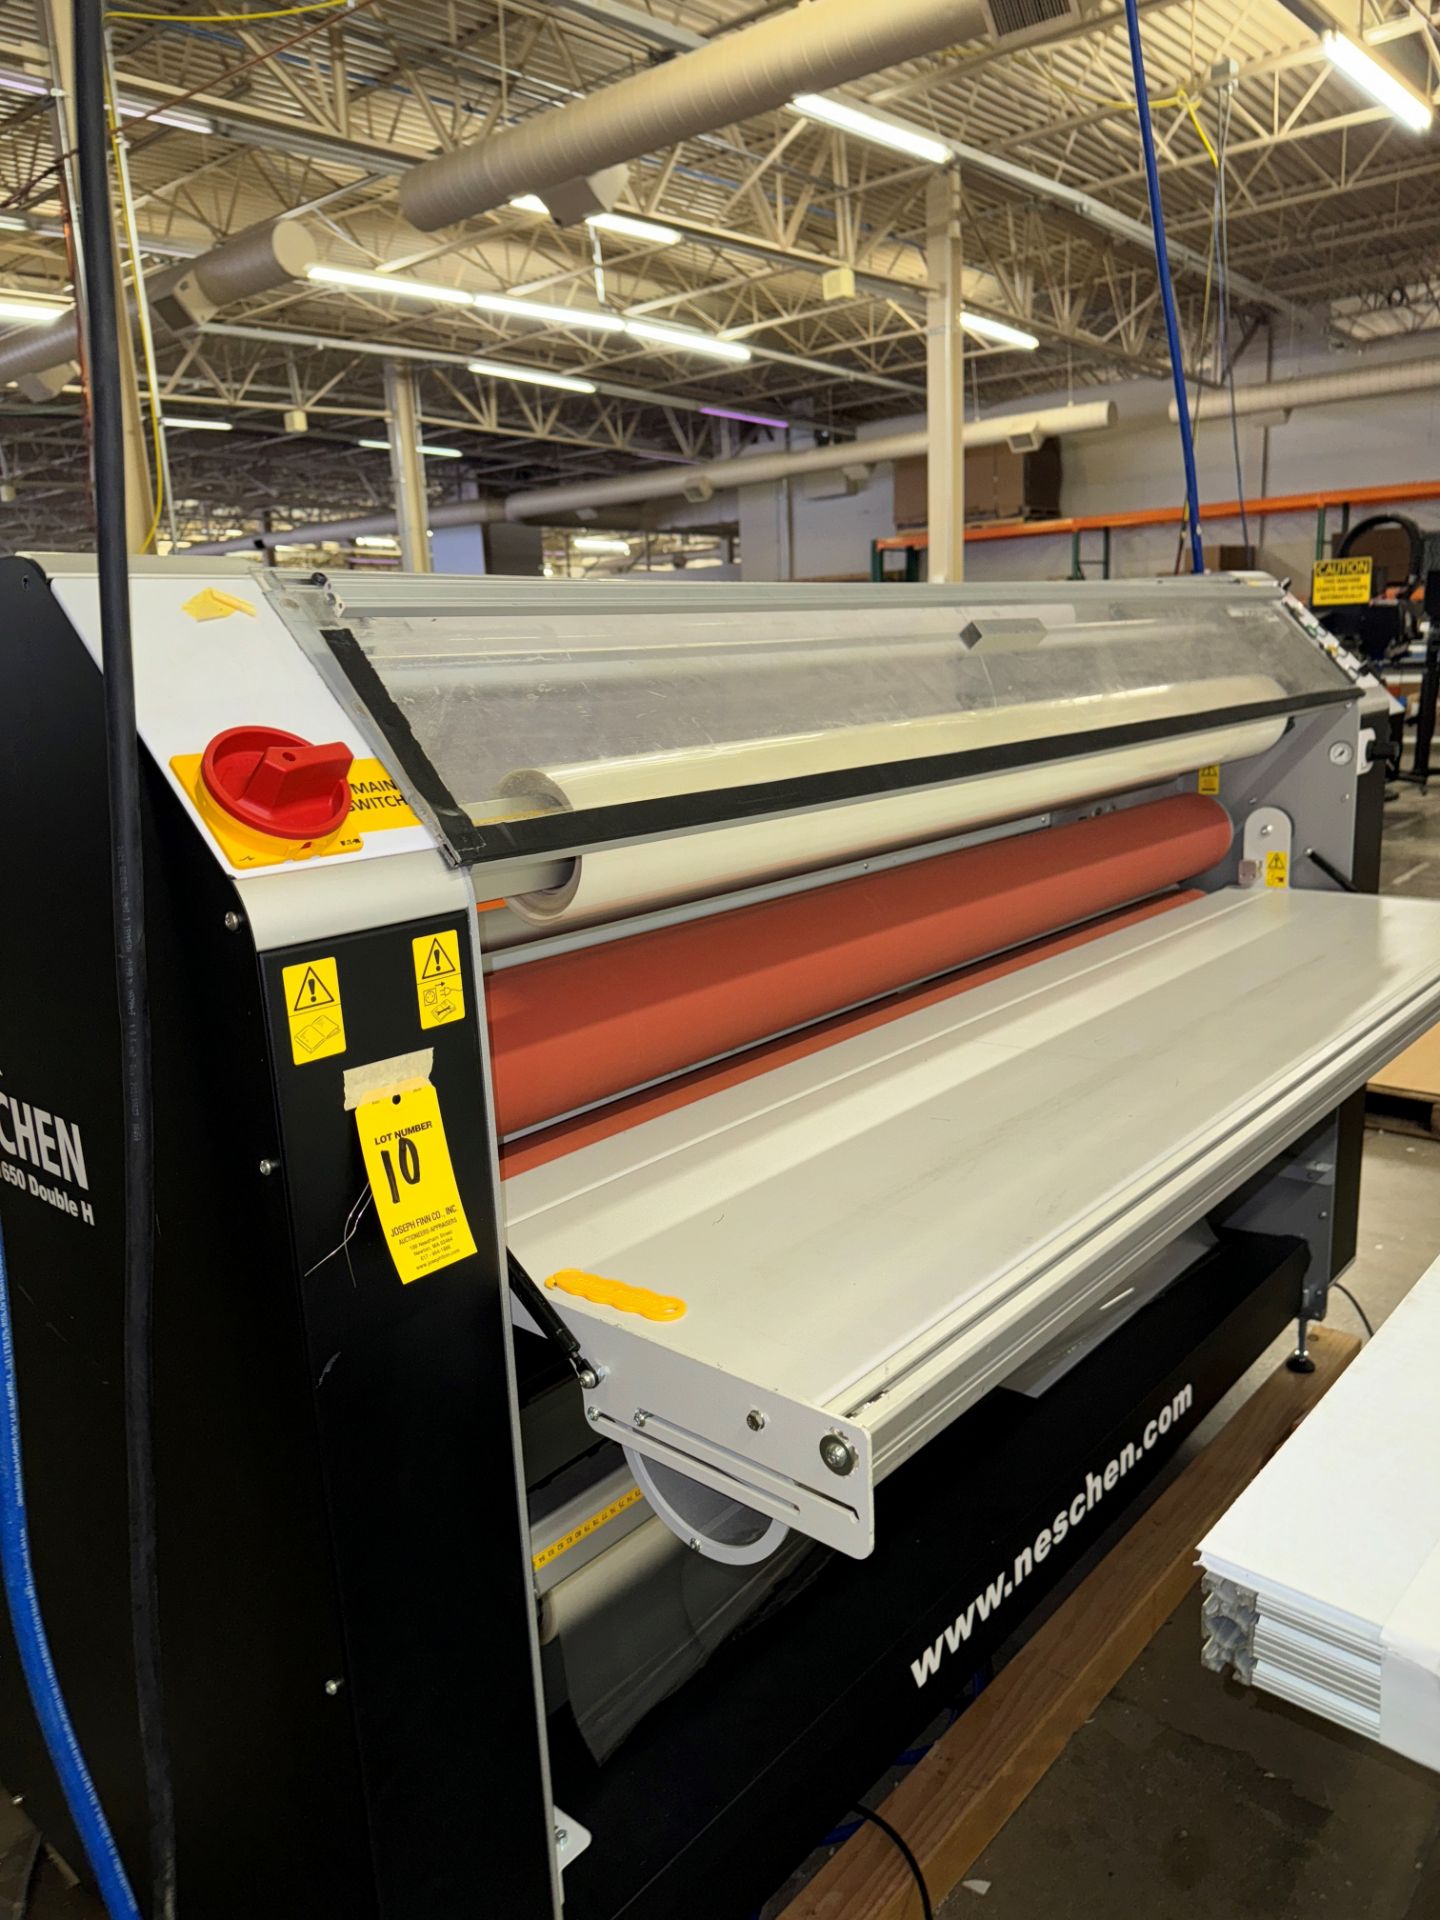 2021 Neschen HotLam 1650 Double H-US Large Format Double Heated Laminati | Rig Fee $420 - Image 5 of 5